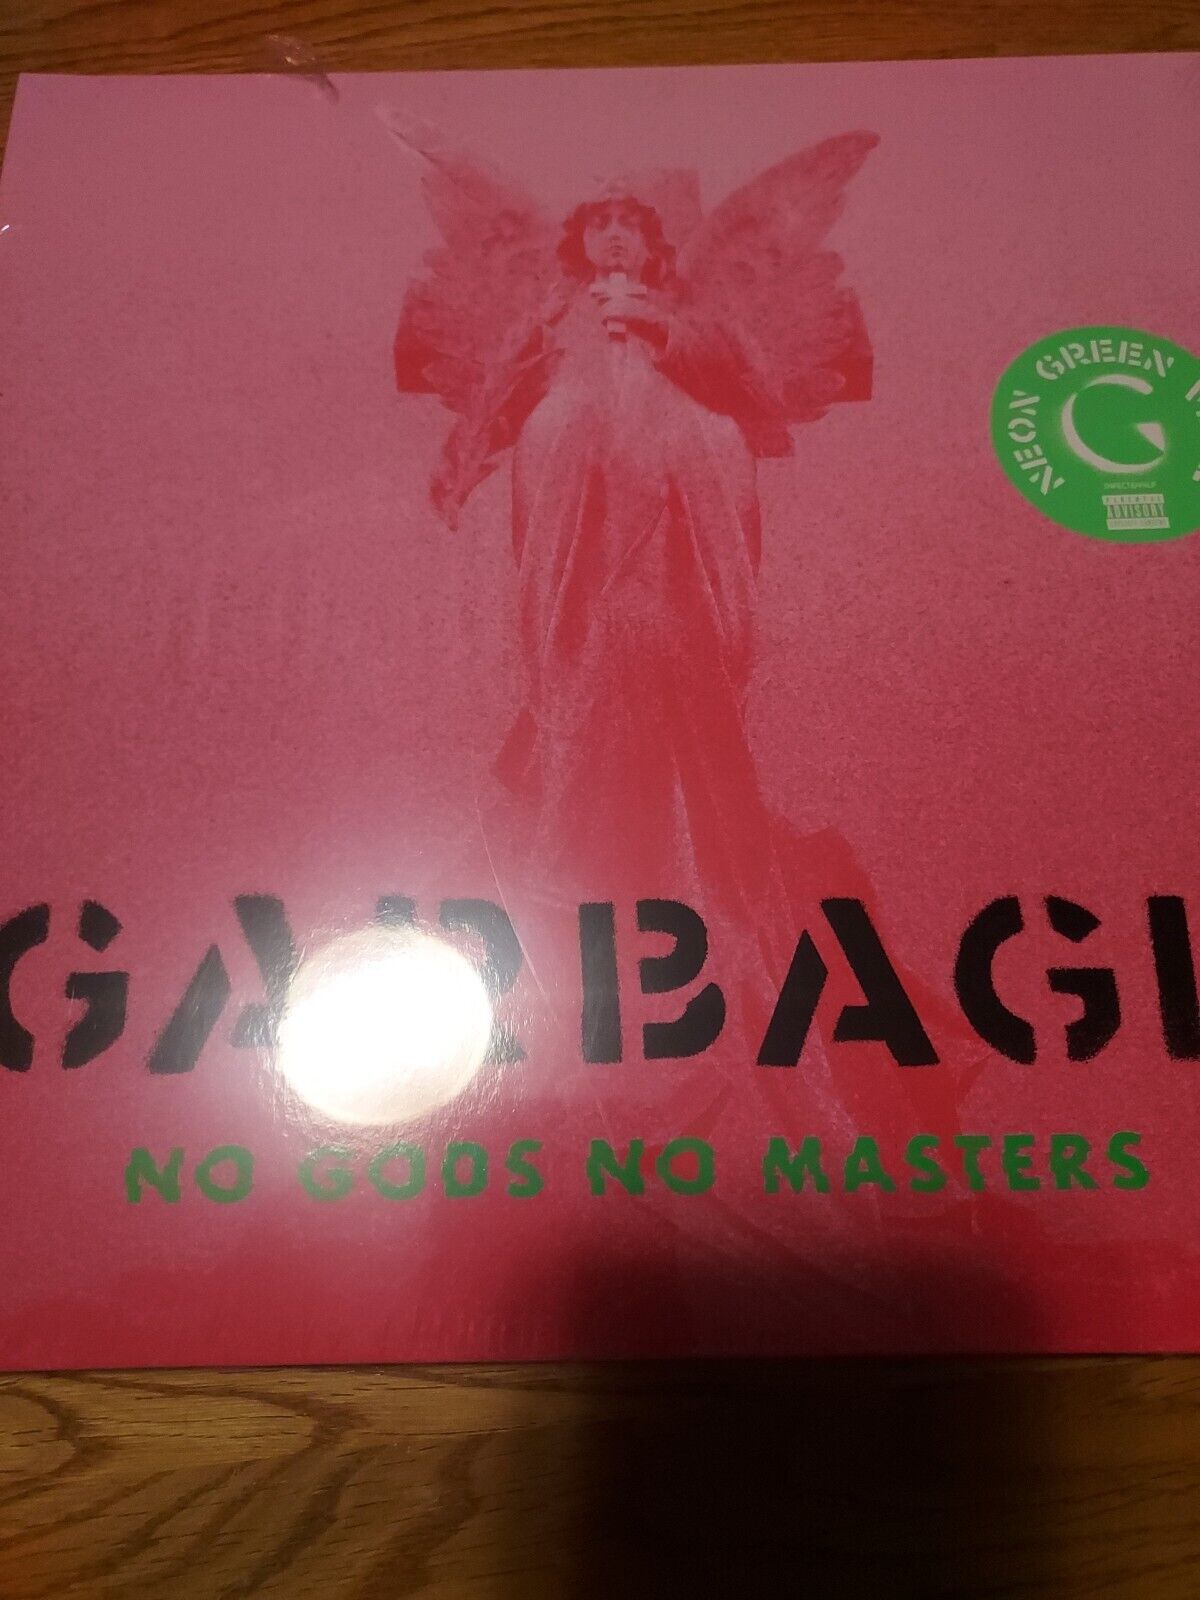 No Gods No Masters by Garbage (Record, 2021)